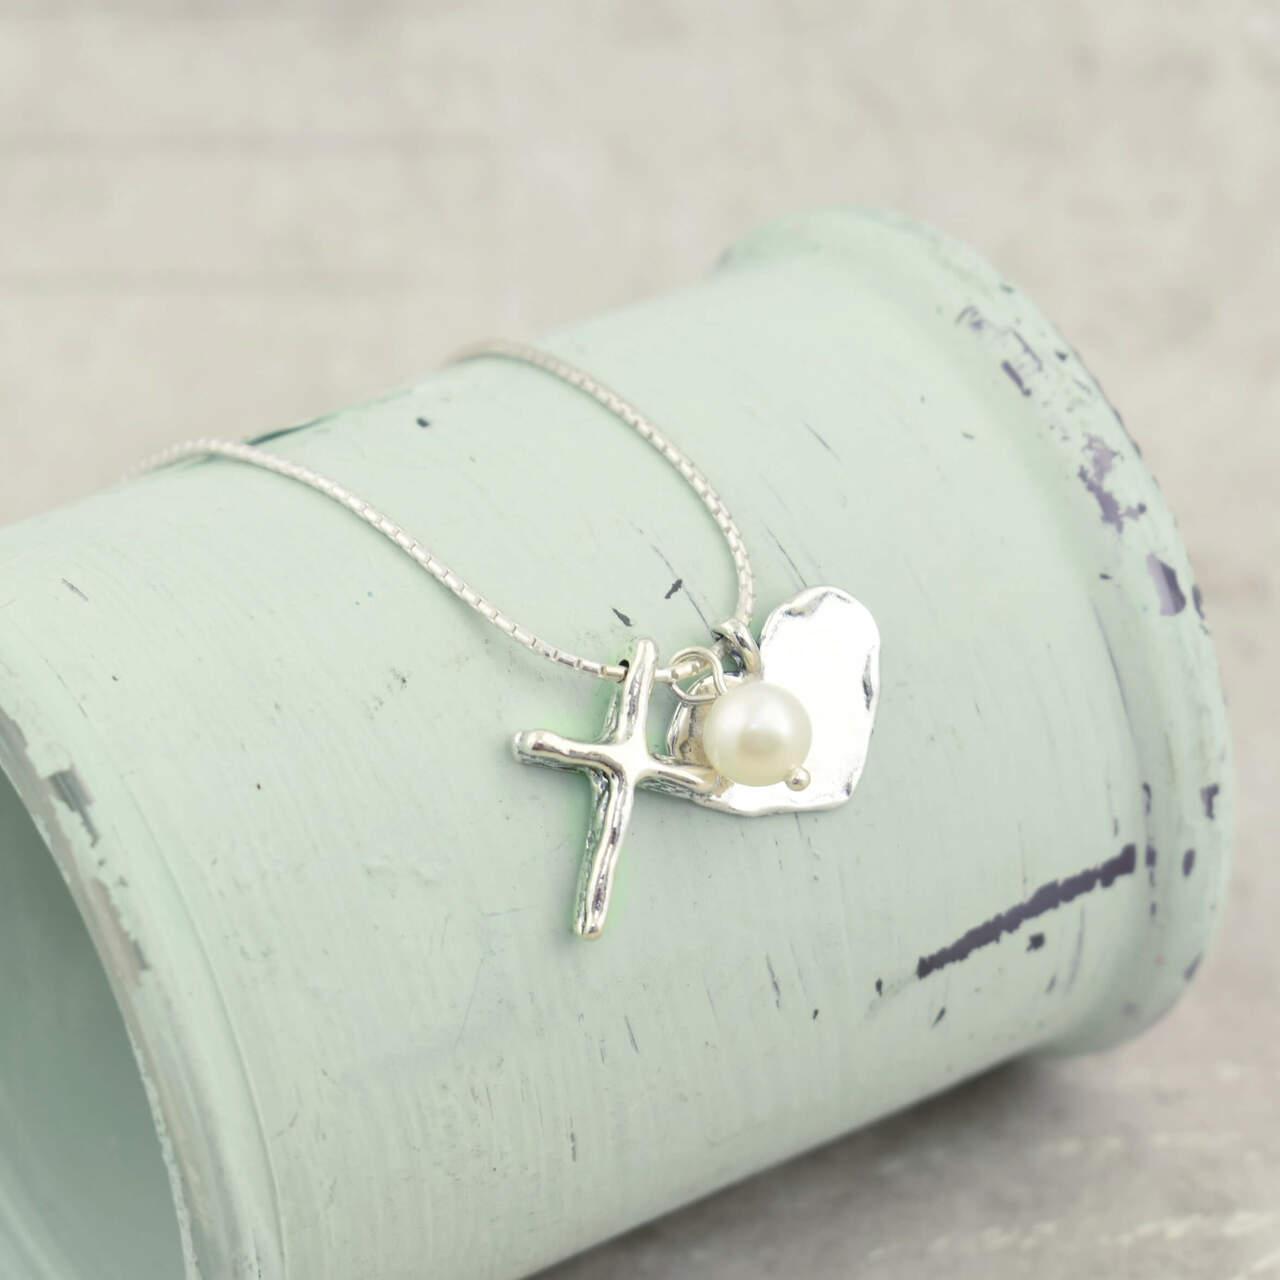 Handcrafted sterling silver and freshwater pearl Joyful Heart necklace